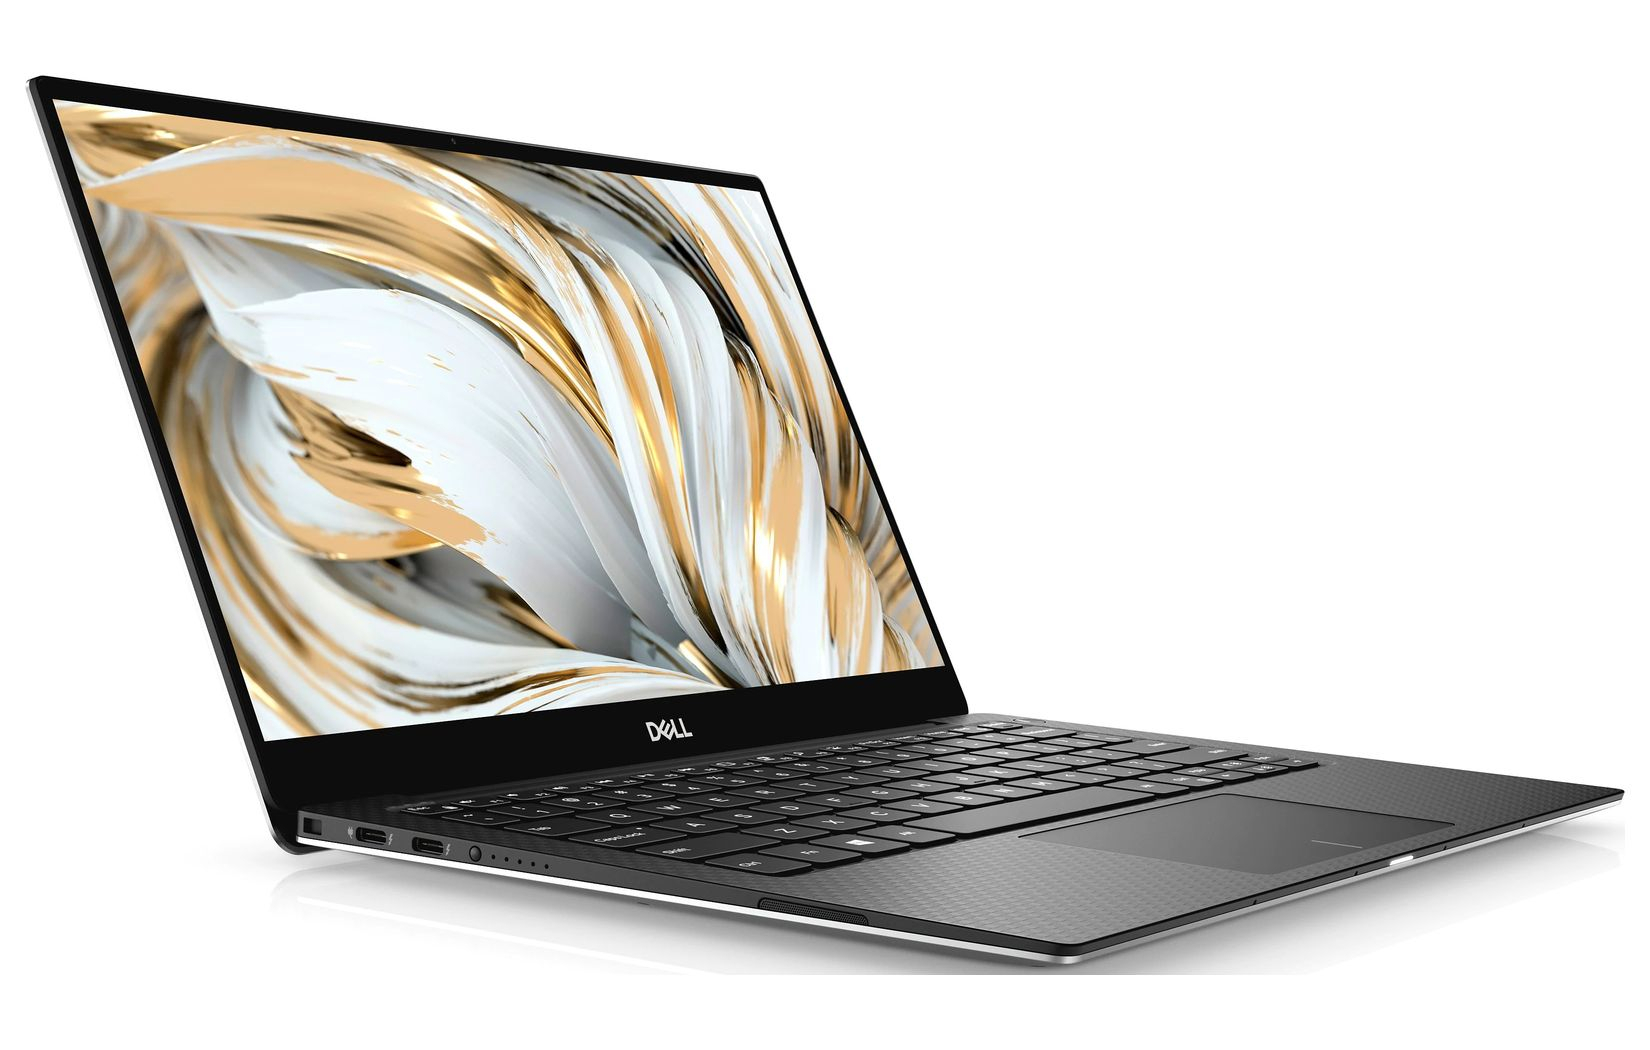 Dell Launches Xps 13 9305 Laptop With 16:9 Screen encequiconcerne Dell Xps Laptop